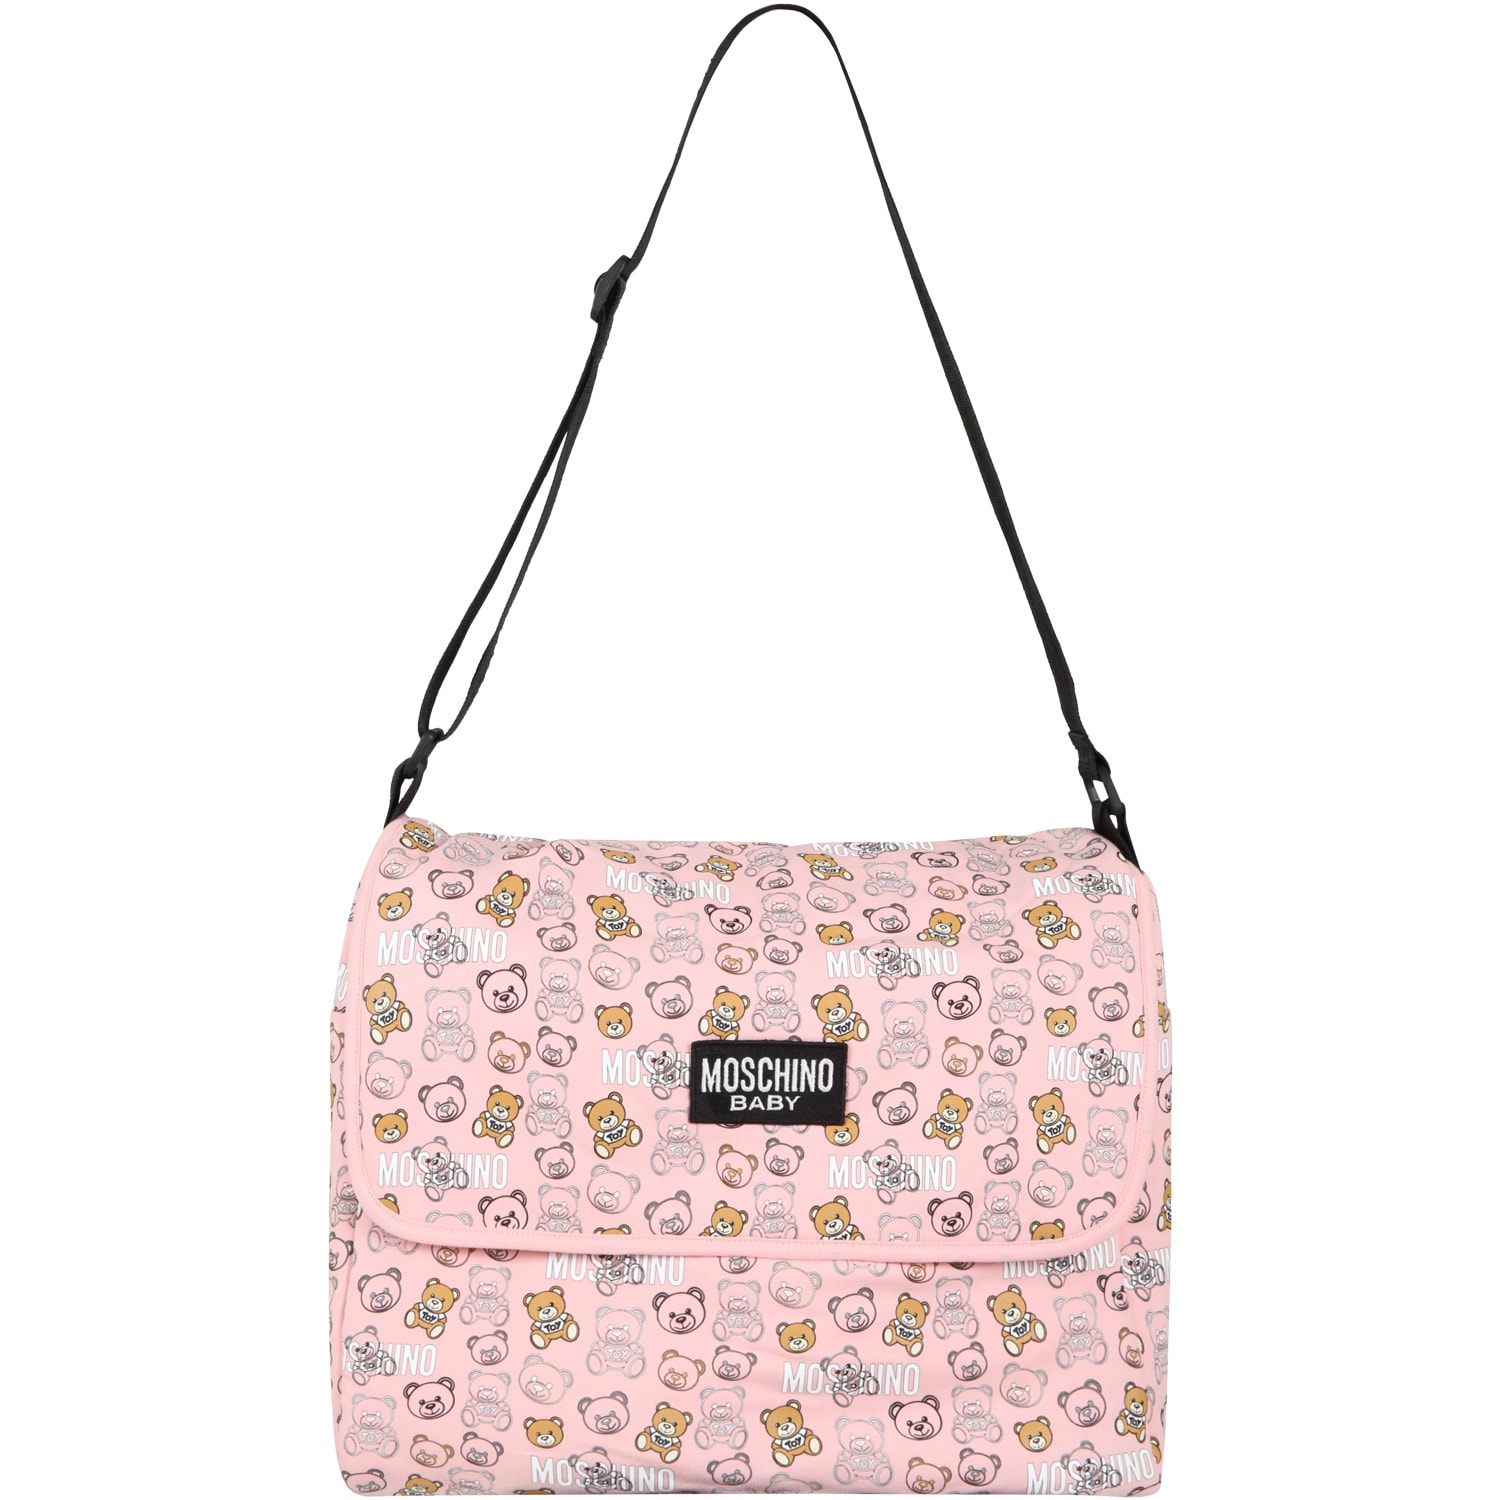 Moschino Pink Changing Bag For Baby Girl With Teddy Bears